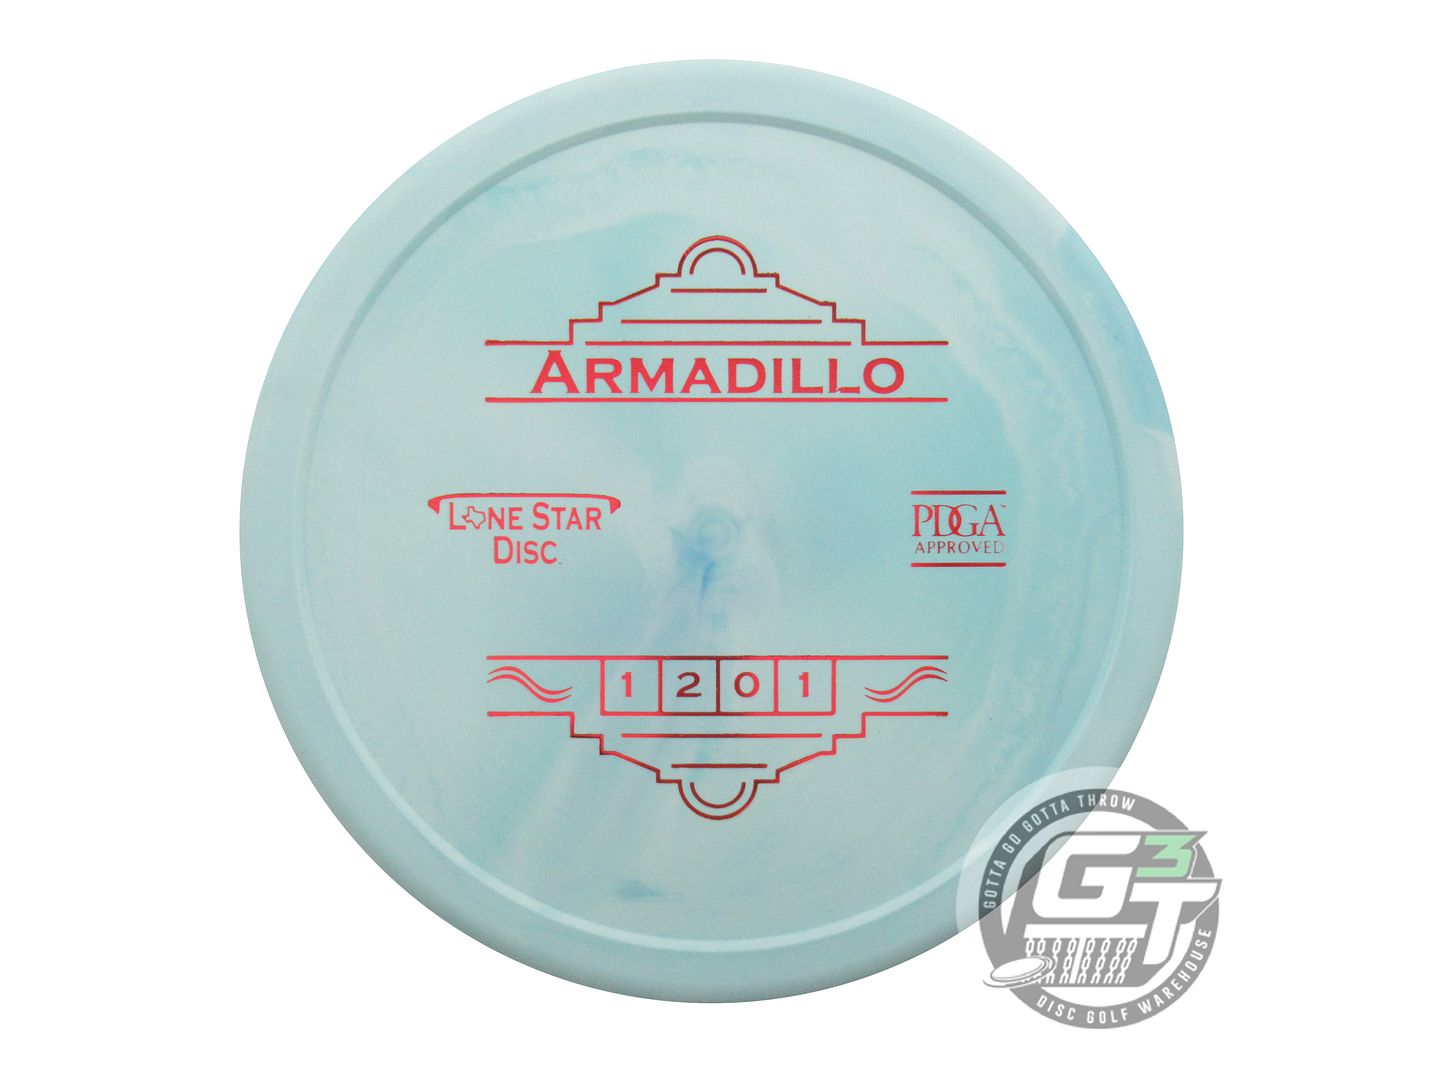 Lone Star Victor 2 Armadillo Putter Golf Disc (Individually Listed)